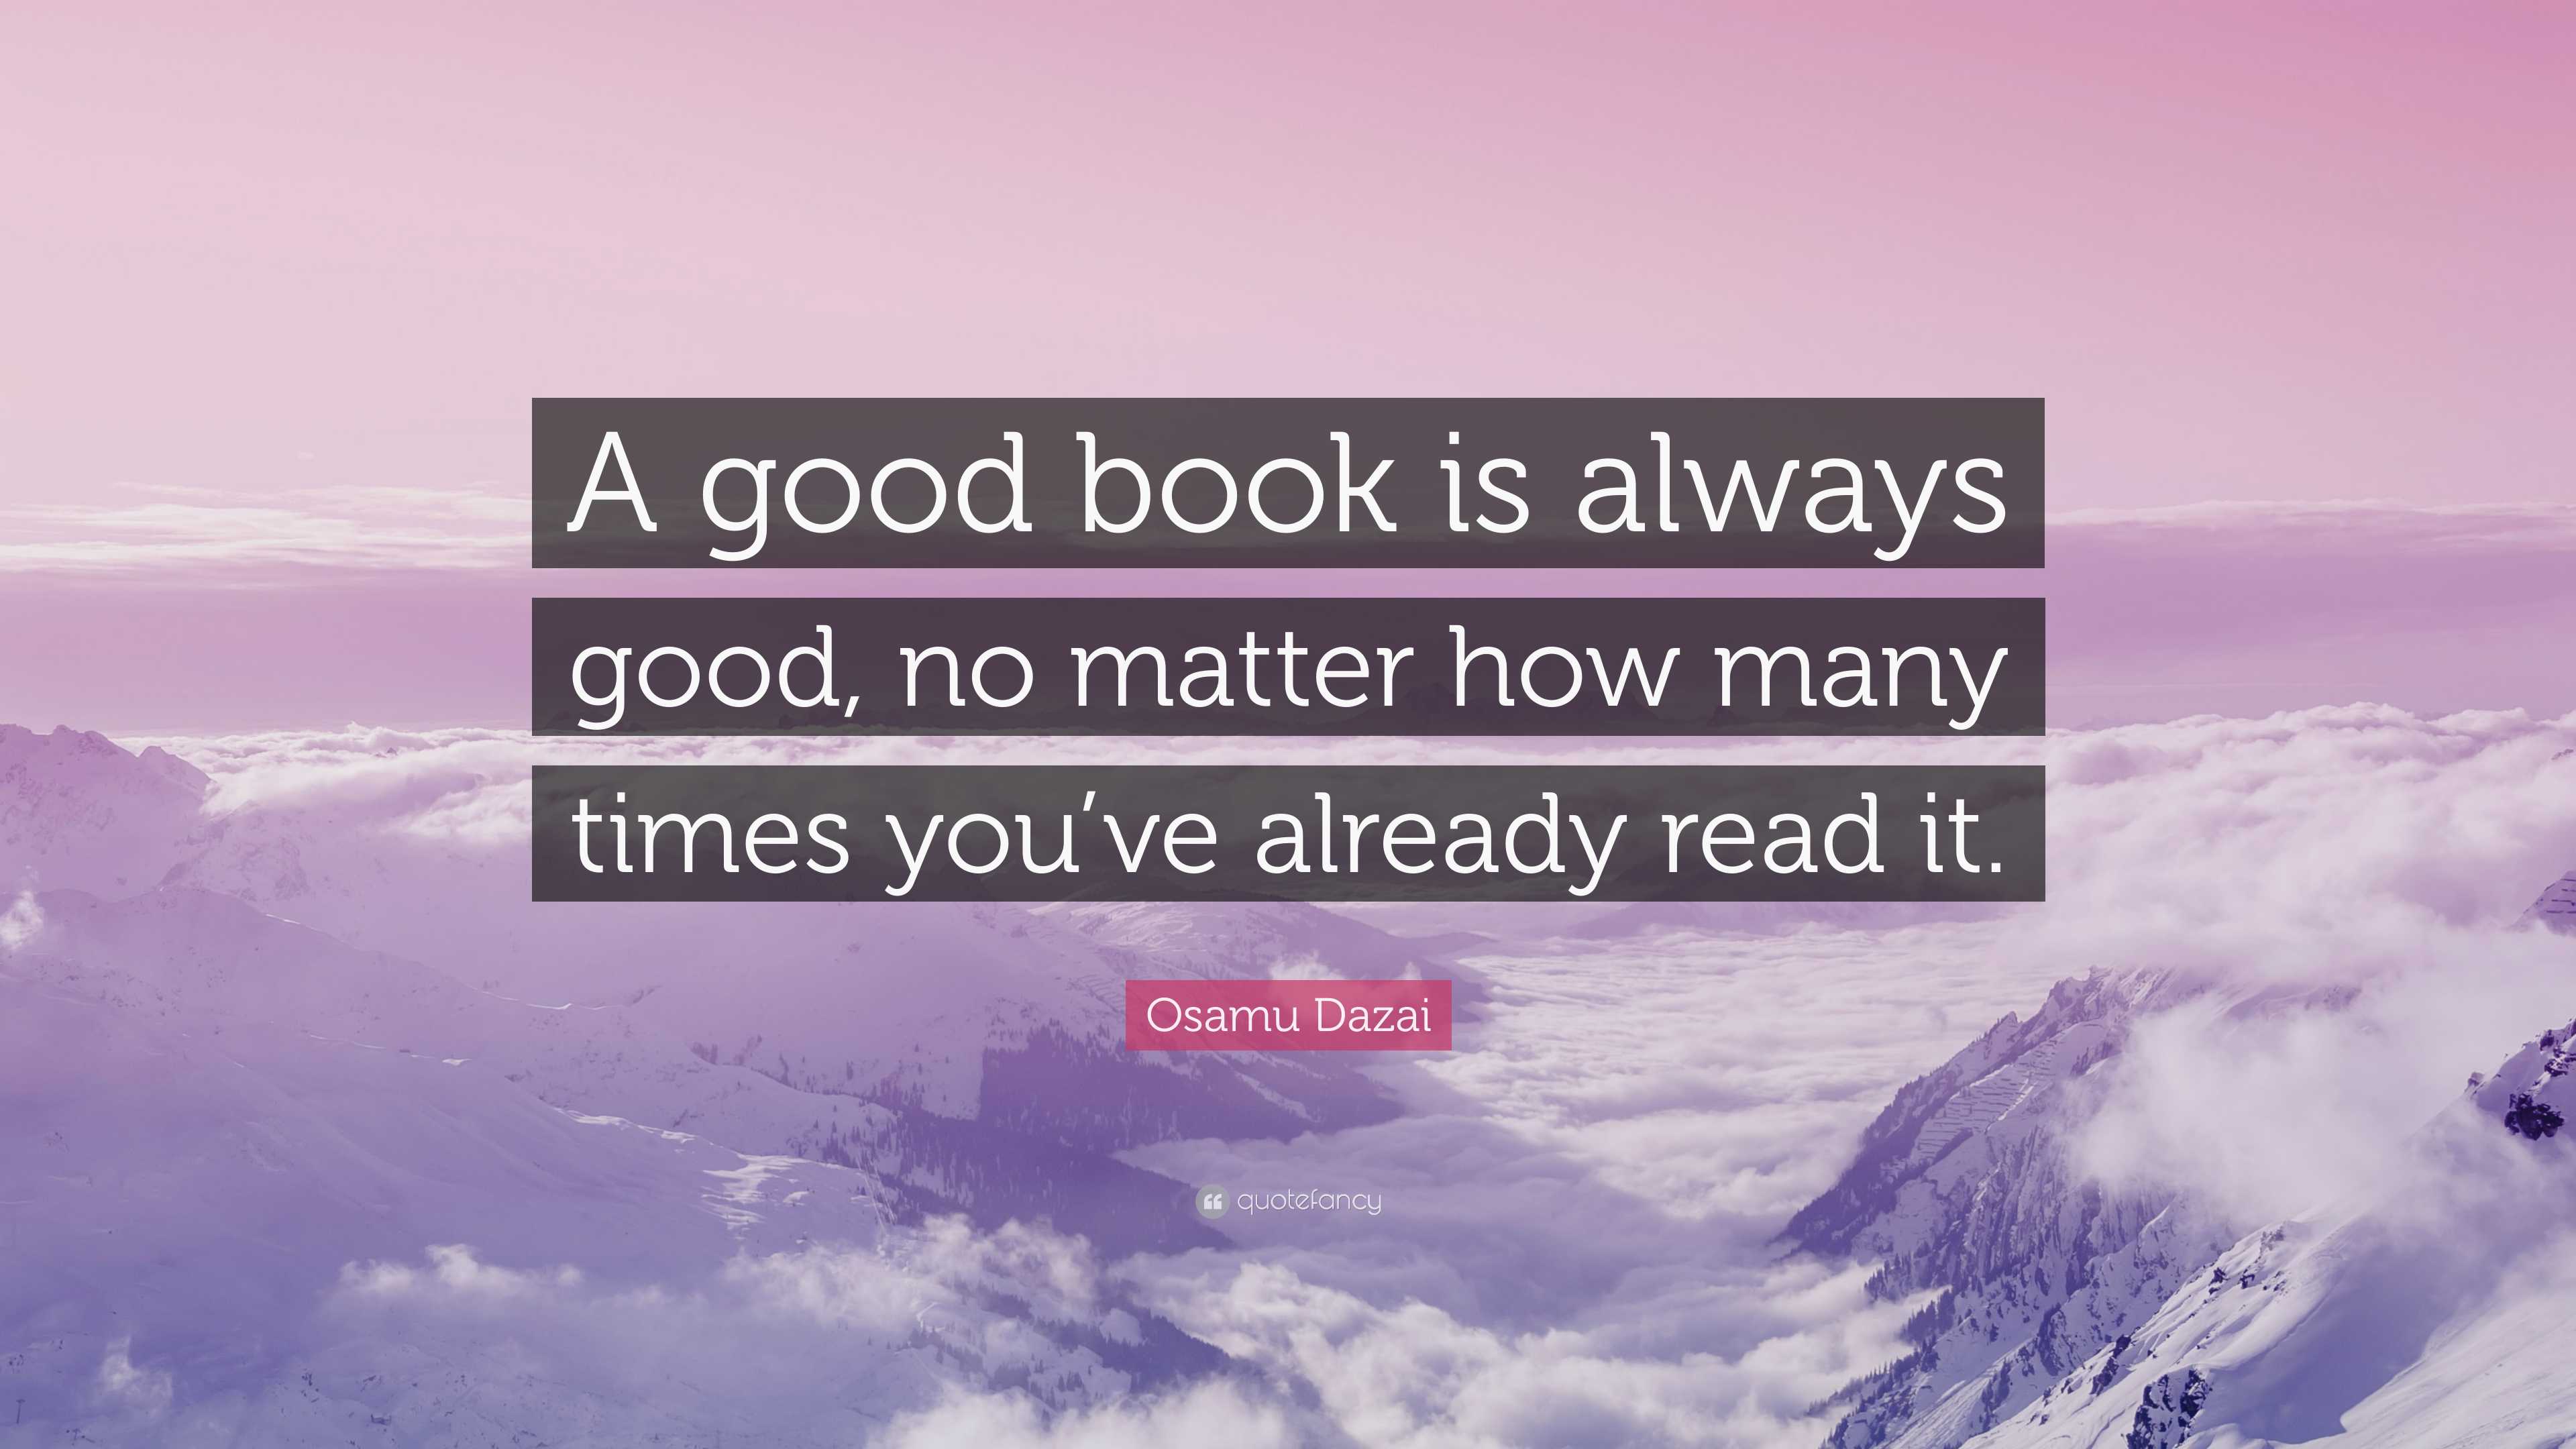 Osamu Dazai Quote: “A good book is always good, no matter how many ...